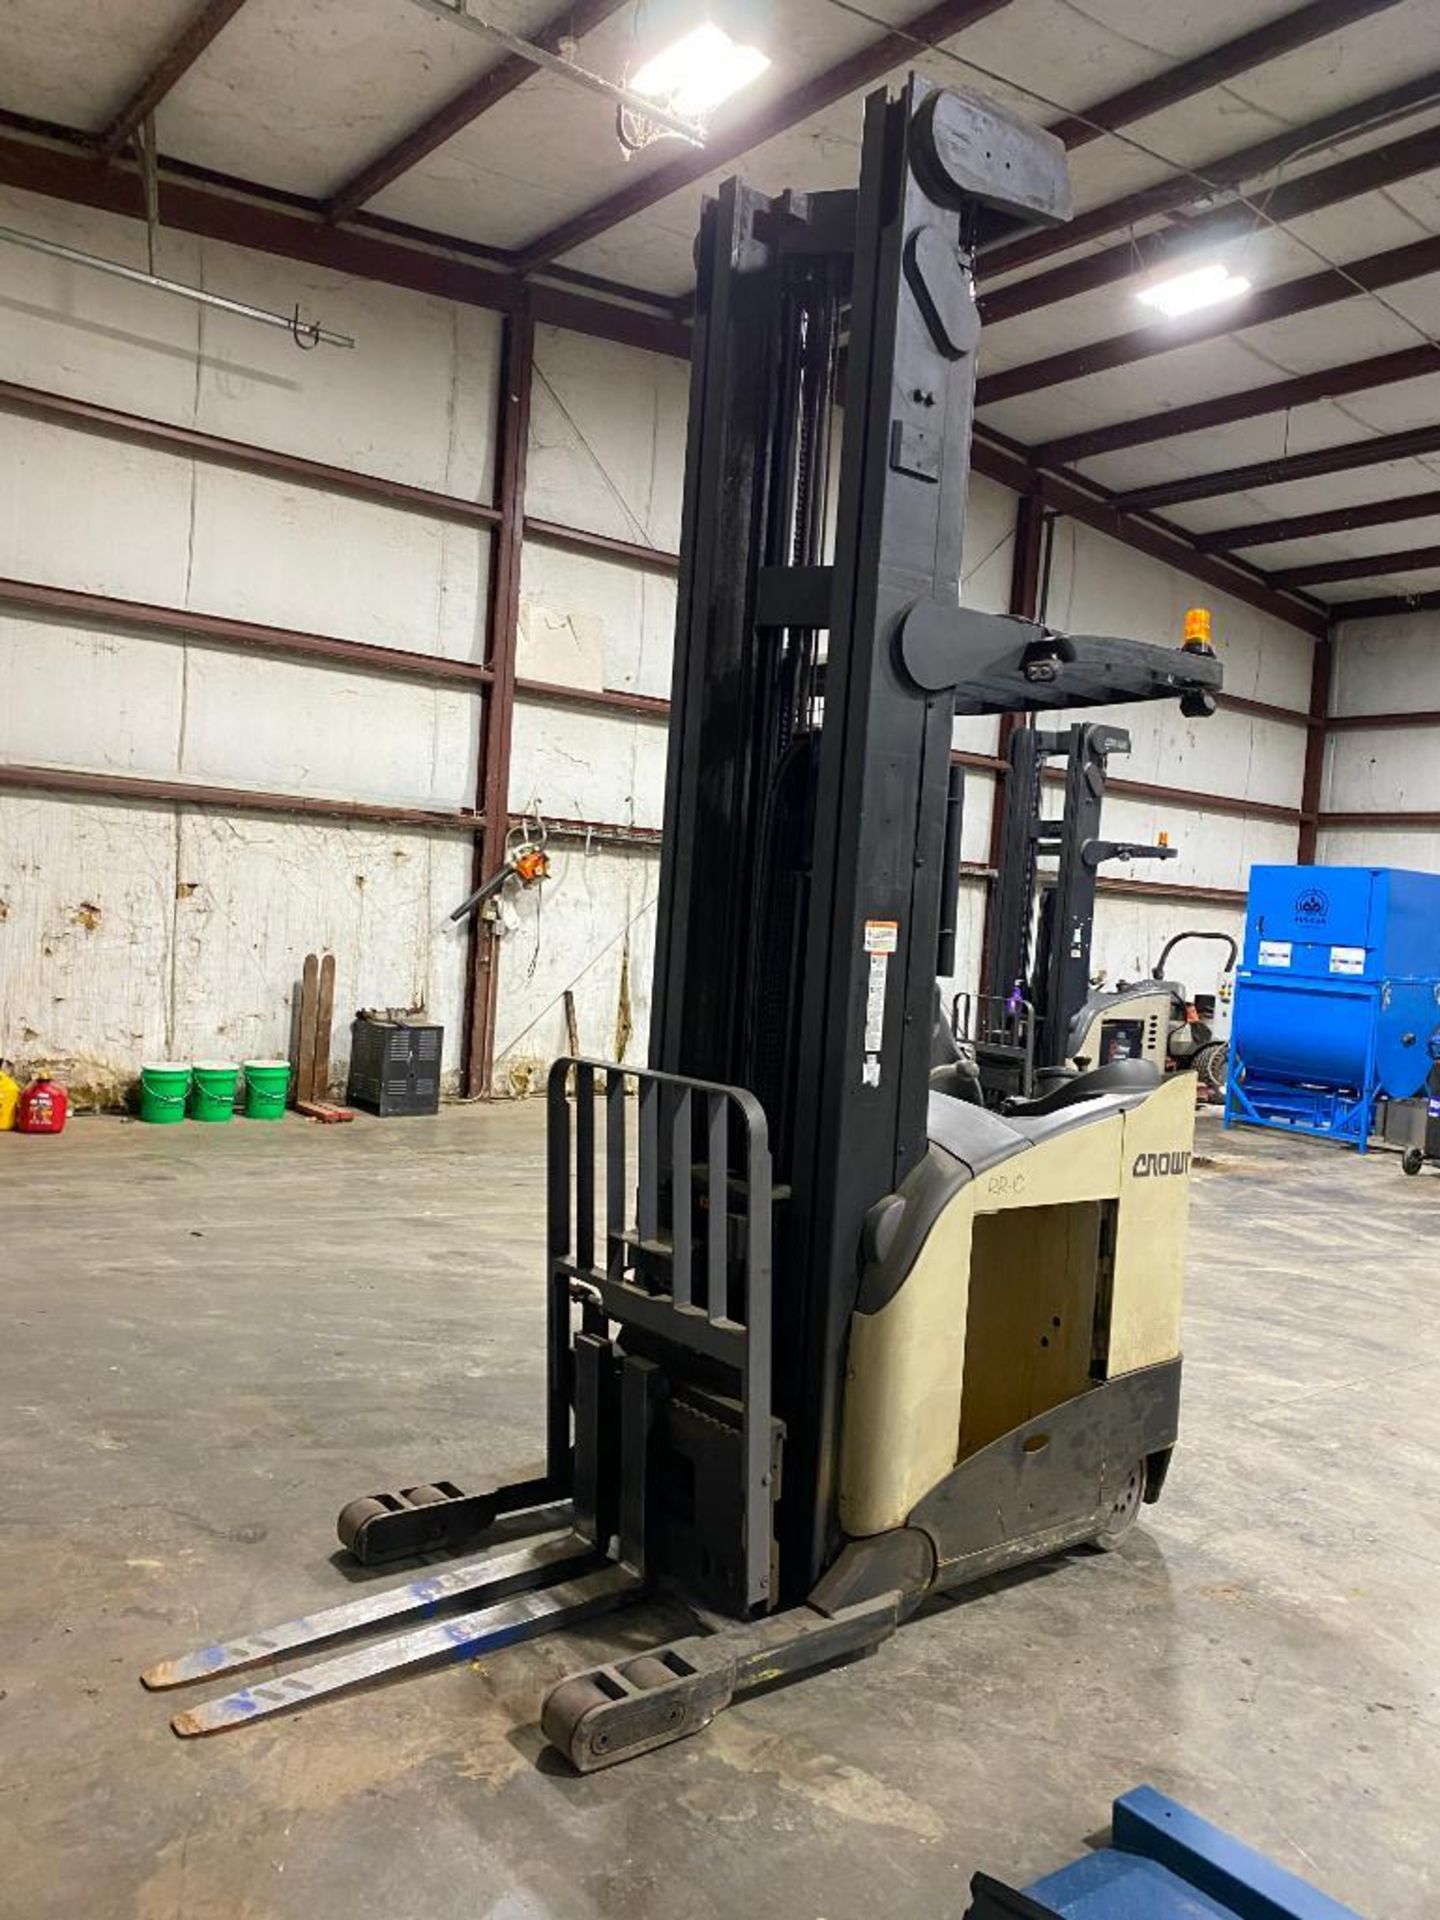 393C Crown 4,500 Lb. Capacity Reach Truck, Model Rr 5725-45, S/N 1a356735, 321” Max. Lift Height, 14 - Image 4 of 6